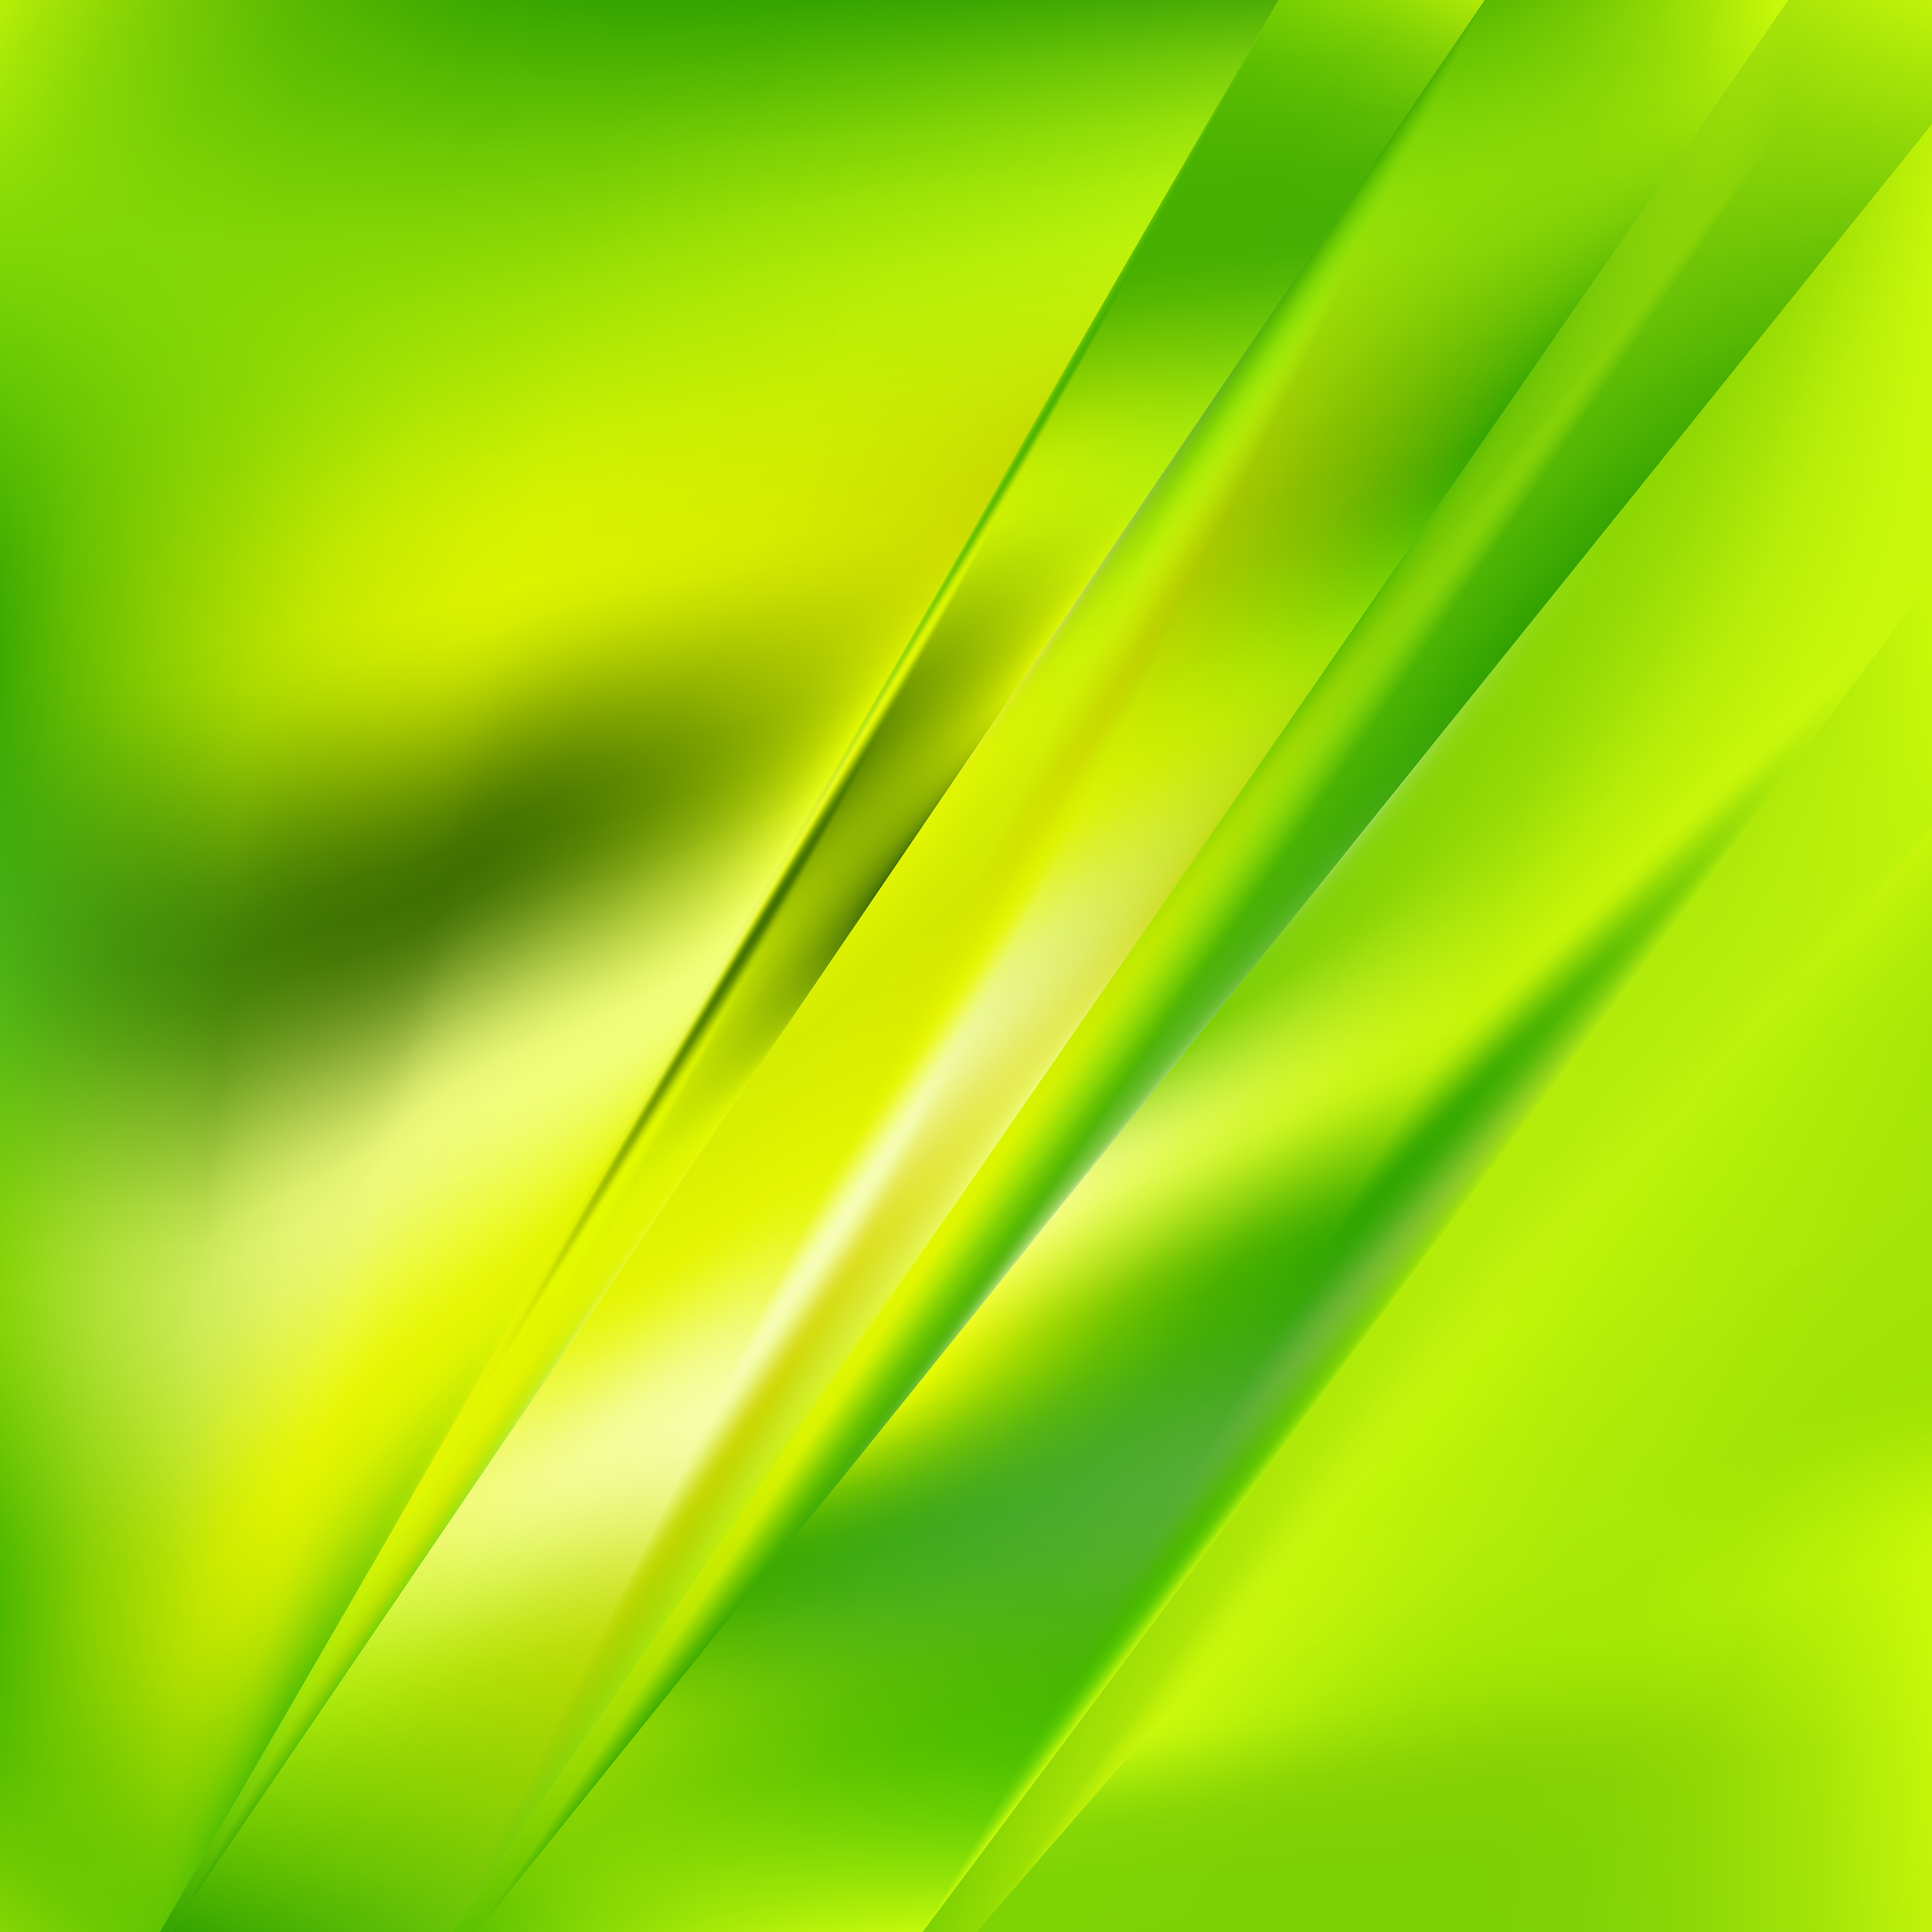 Free Abstract Green and Yellow Background Design